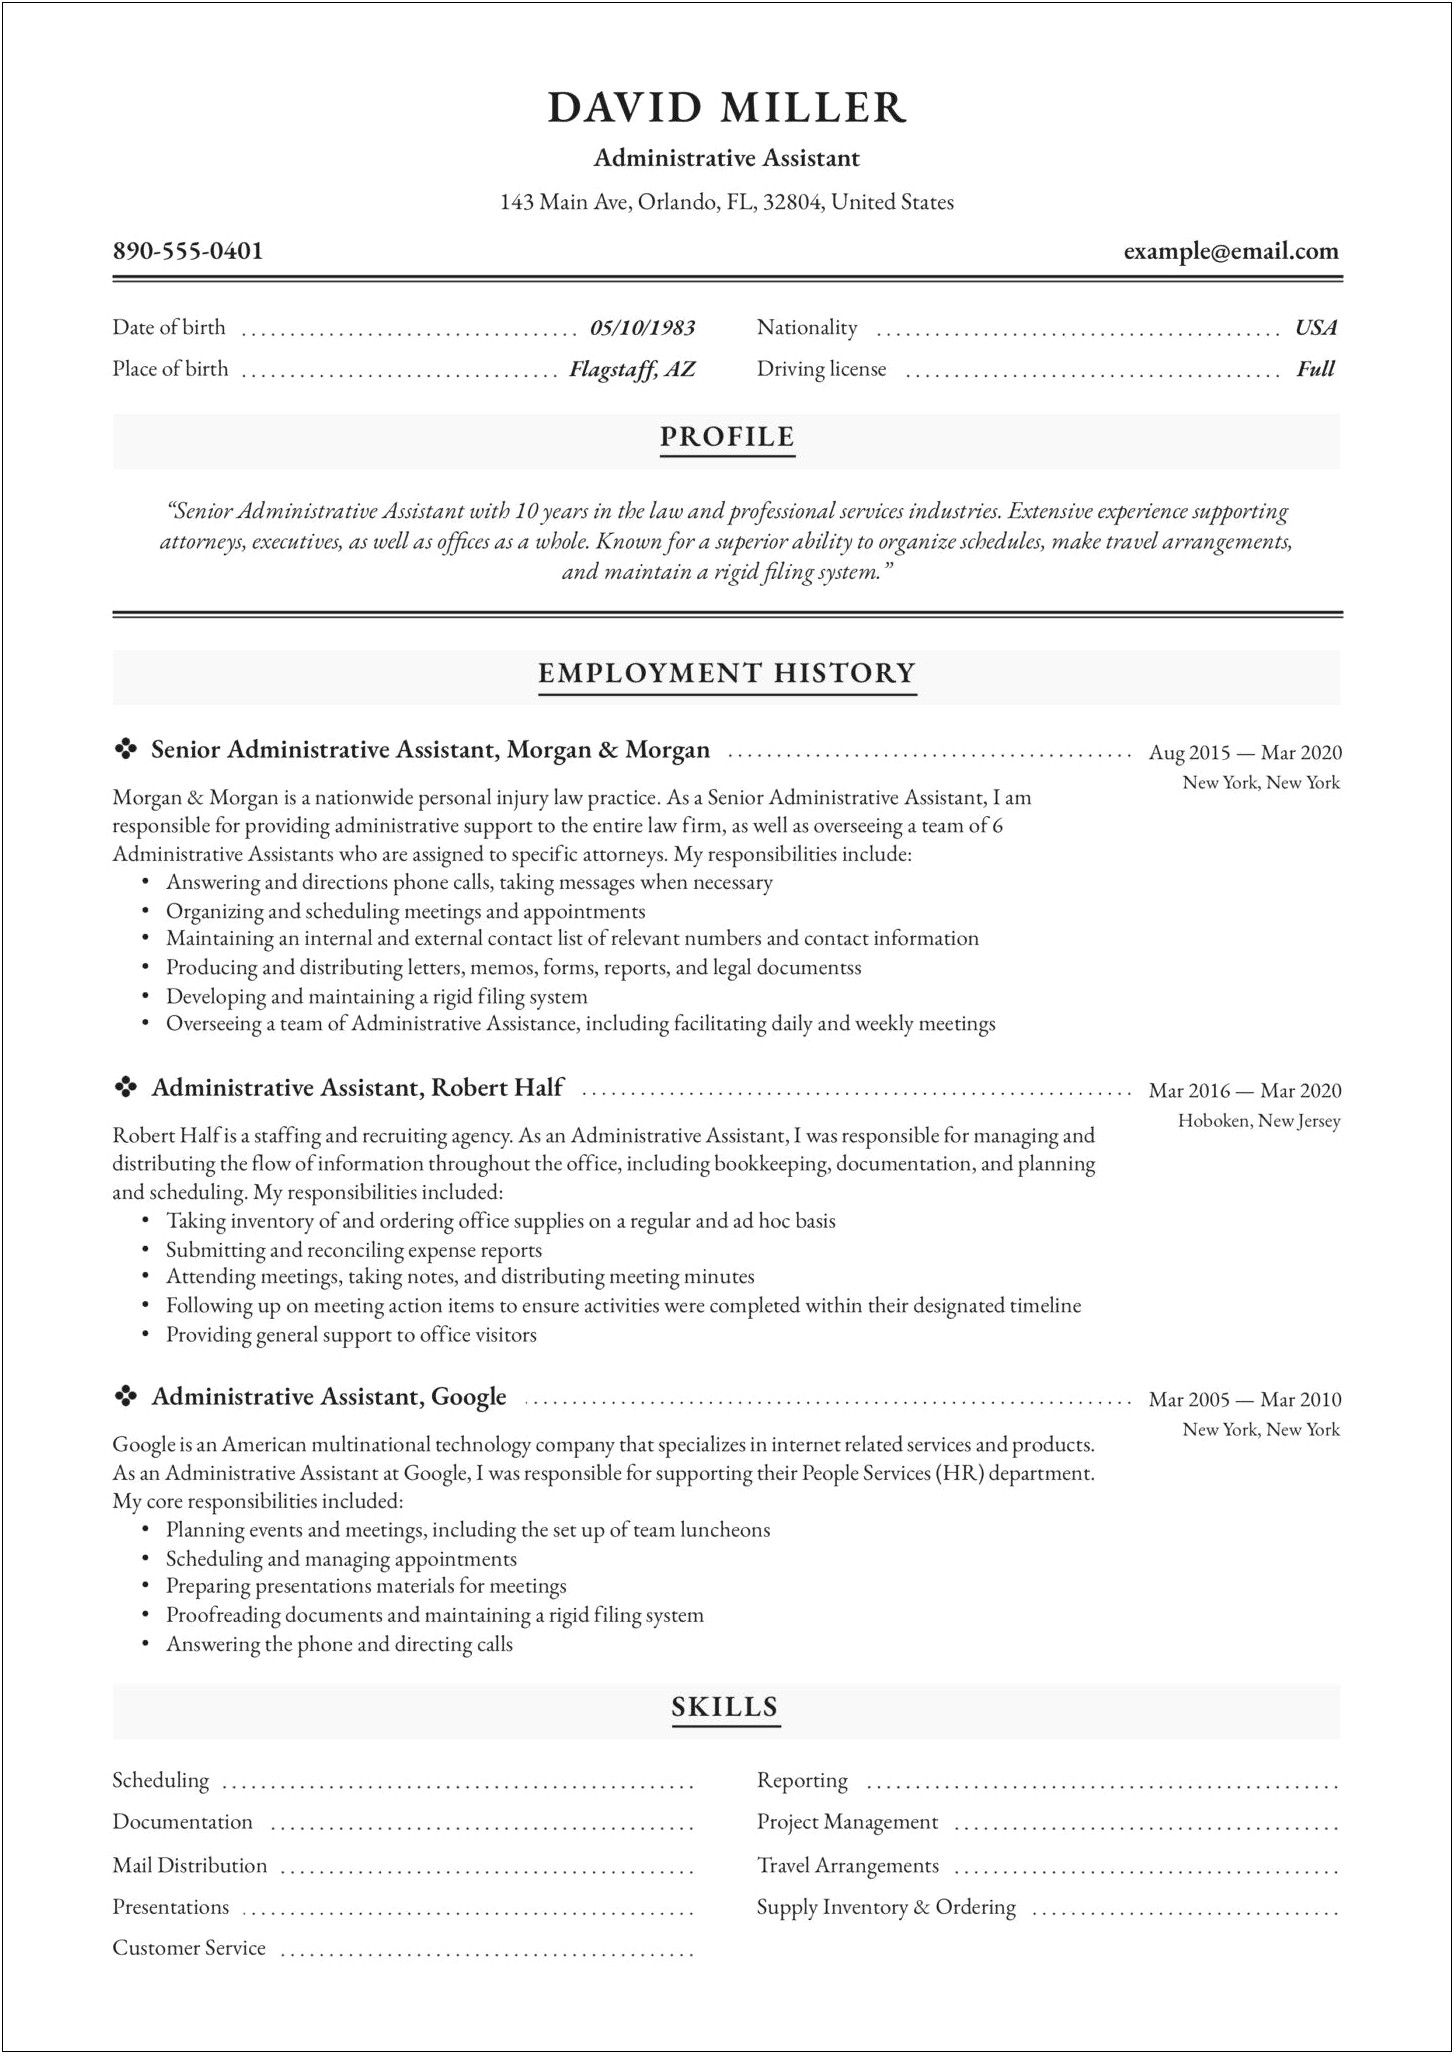 Best Administrative Assistant Resume 2018